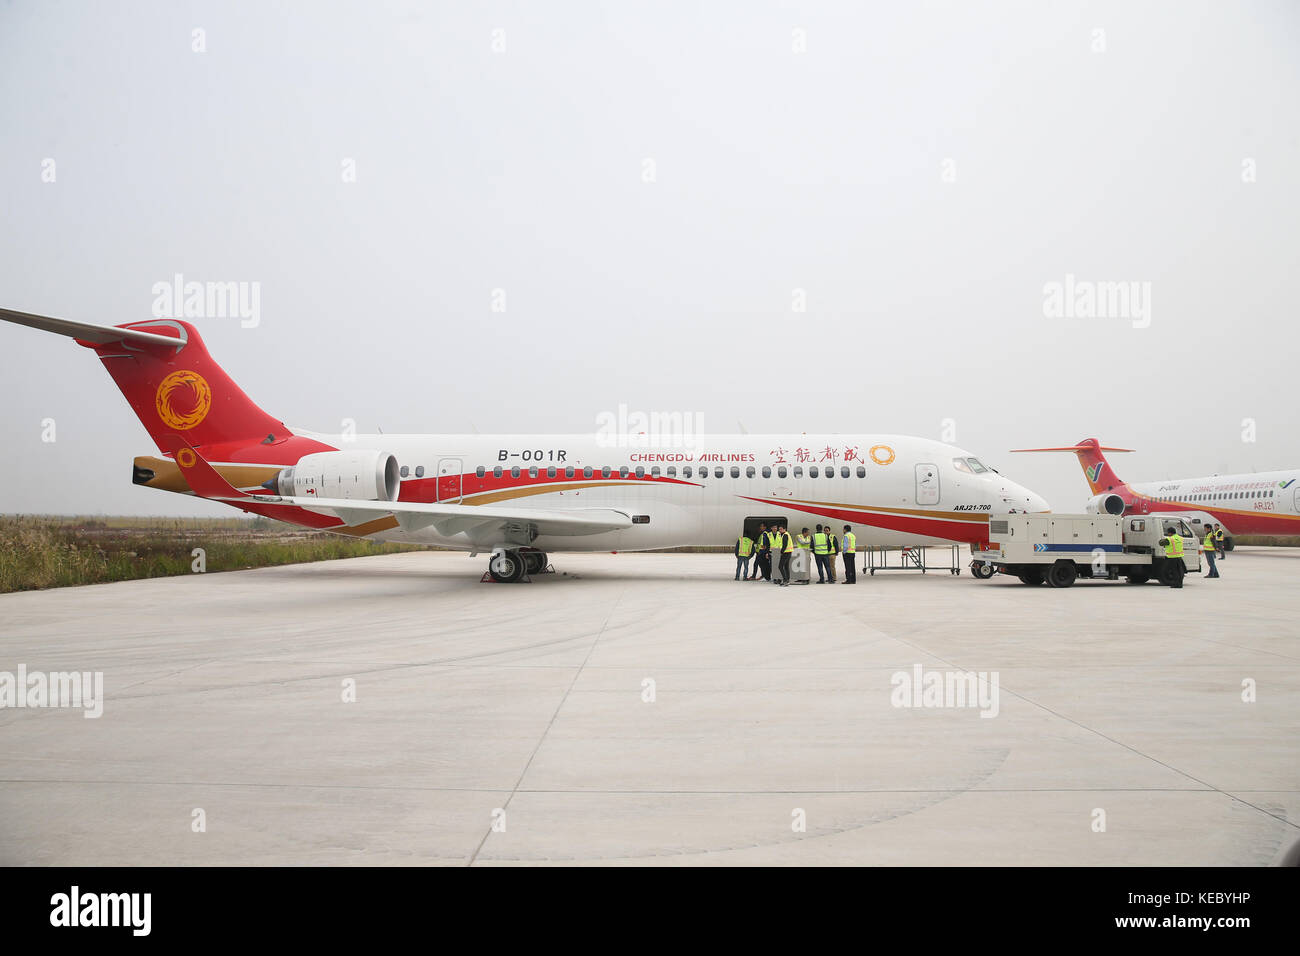 Shanghai. 14th Oct, 2017. Photo taken on Oct. 14, 2017 shows ARJ21-700 jetliner at Shengli Airport in Dongying of east China's Shandong Province. China's first domestic regional jetliner ARJ21-700 was delivered Thursday after its mass production was certified in July. The ARJ21-700 jetliner has 90 economy seats and was bought by China Aerospace Leasing Company, and delivered to Chengdu Airlines. The Commercial Aircraft Corporation of China (COMAC) obtained a production license to build the airliner from the General Administration of Civil Aviation. Credit: Ding Ting/Xinhua/Alamy Live News Stock Photo